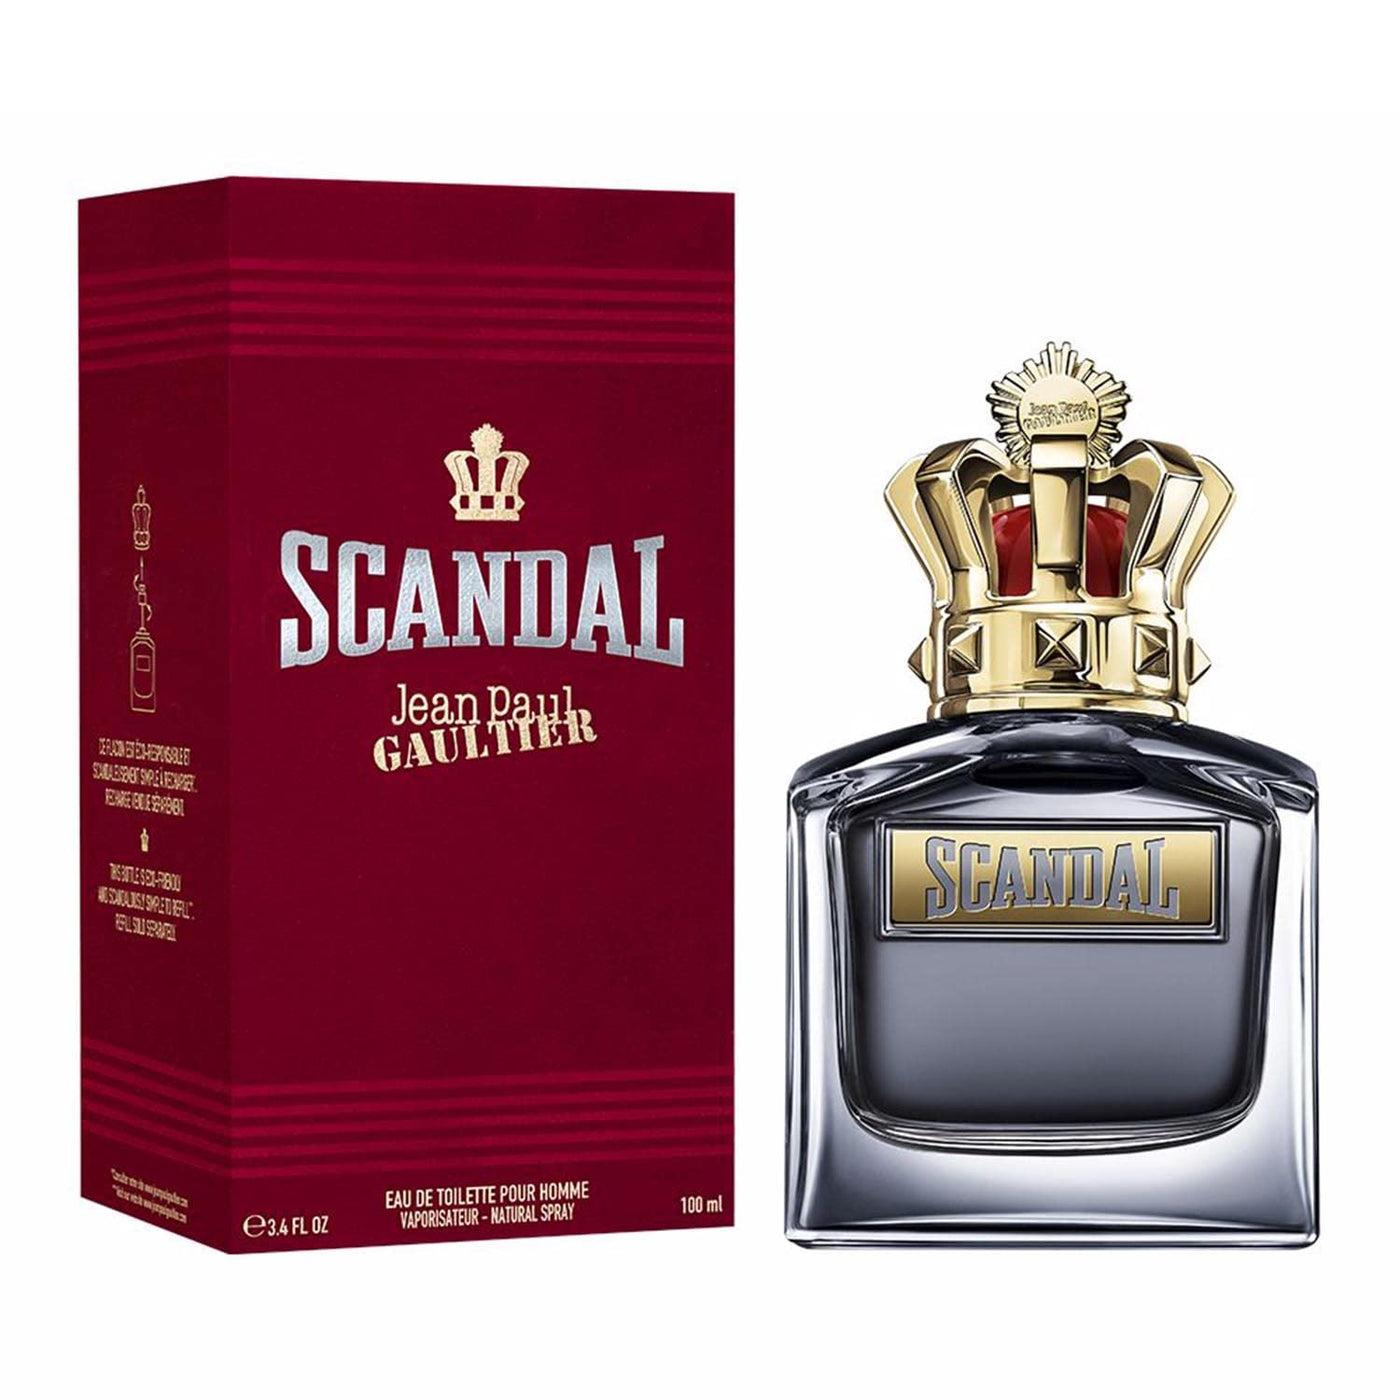 Shop for Jean Paul Gaultier Colognes and Perfumes